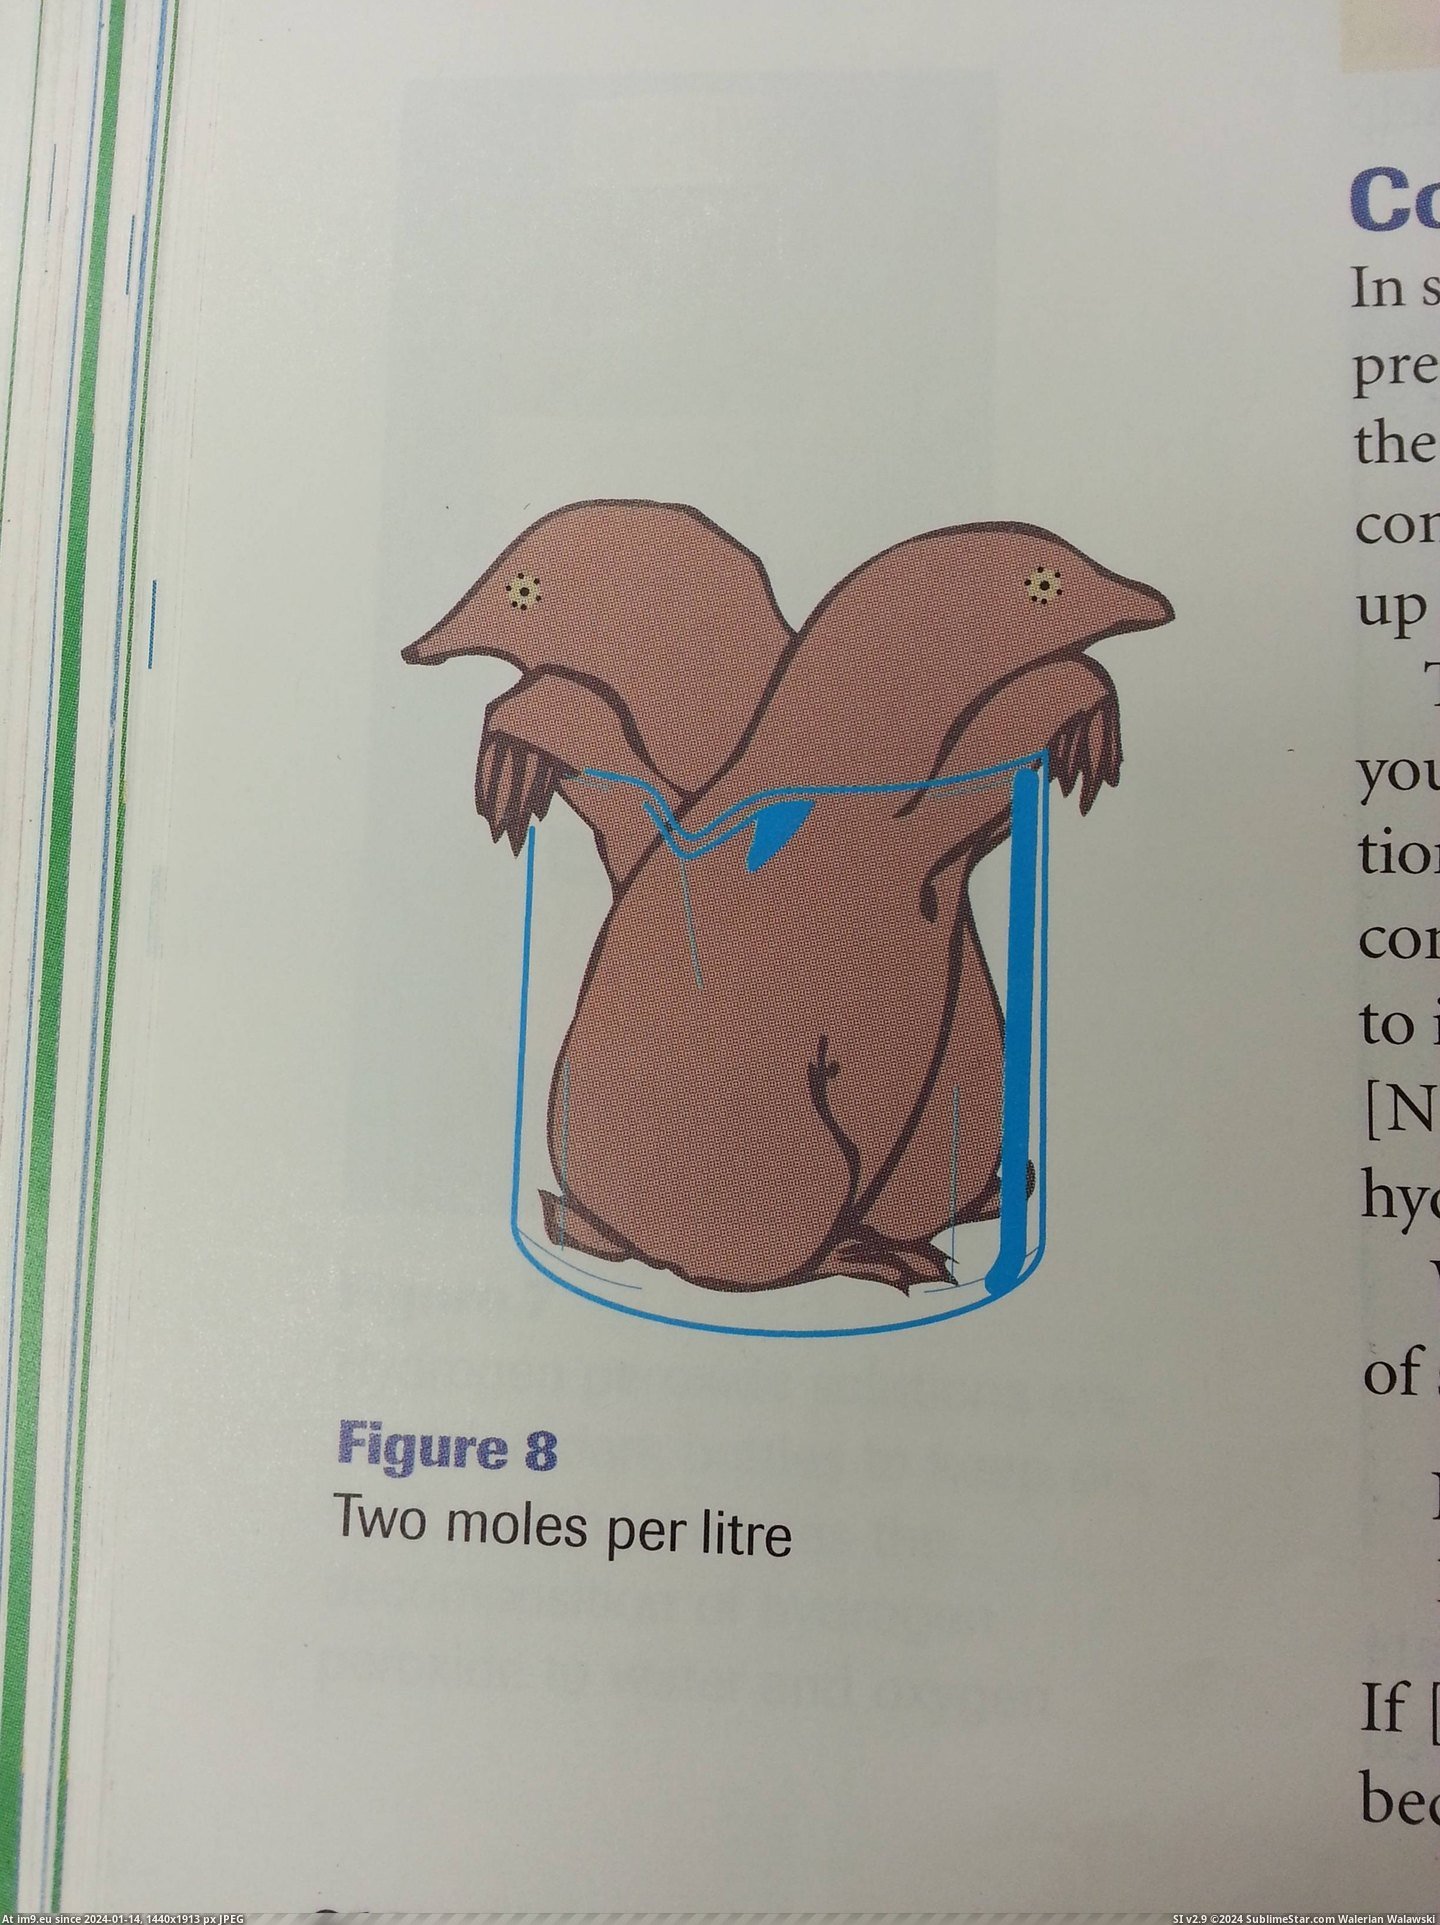 #Funny #Chemistry #Textbook #Played [Funny] Well played chemistry textbook Pic. (Изображение из альбом My r/FUNNY favs))